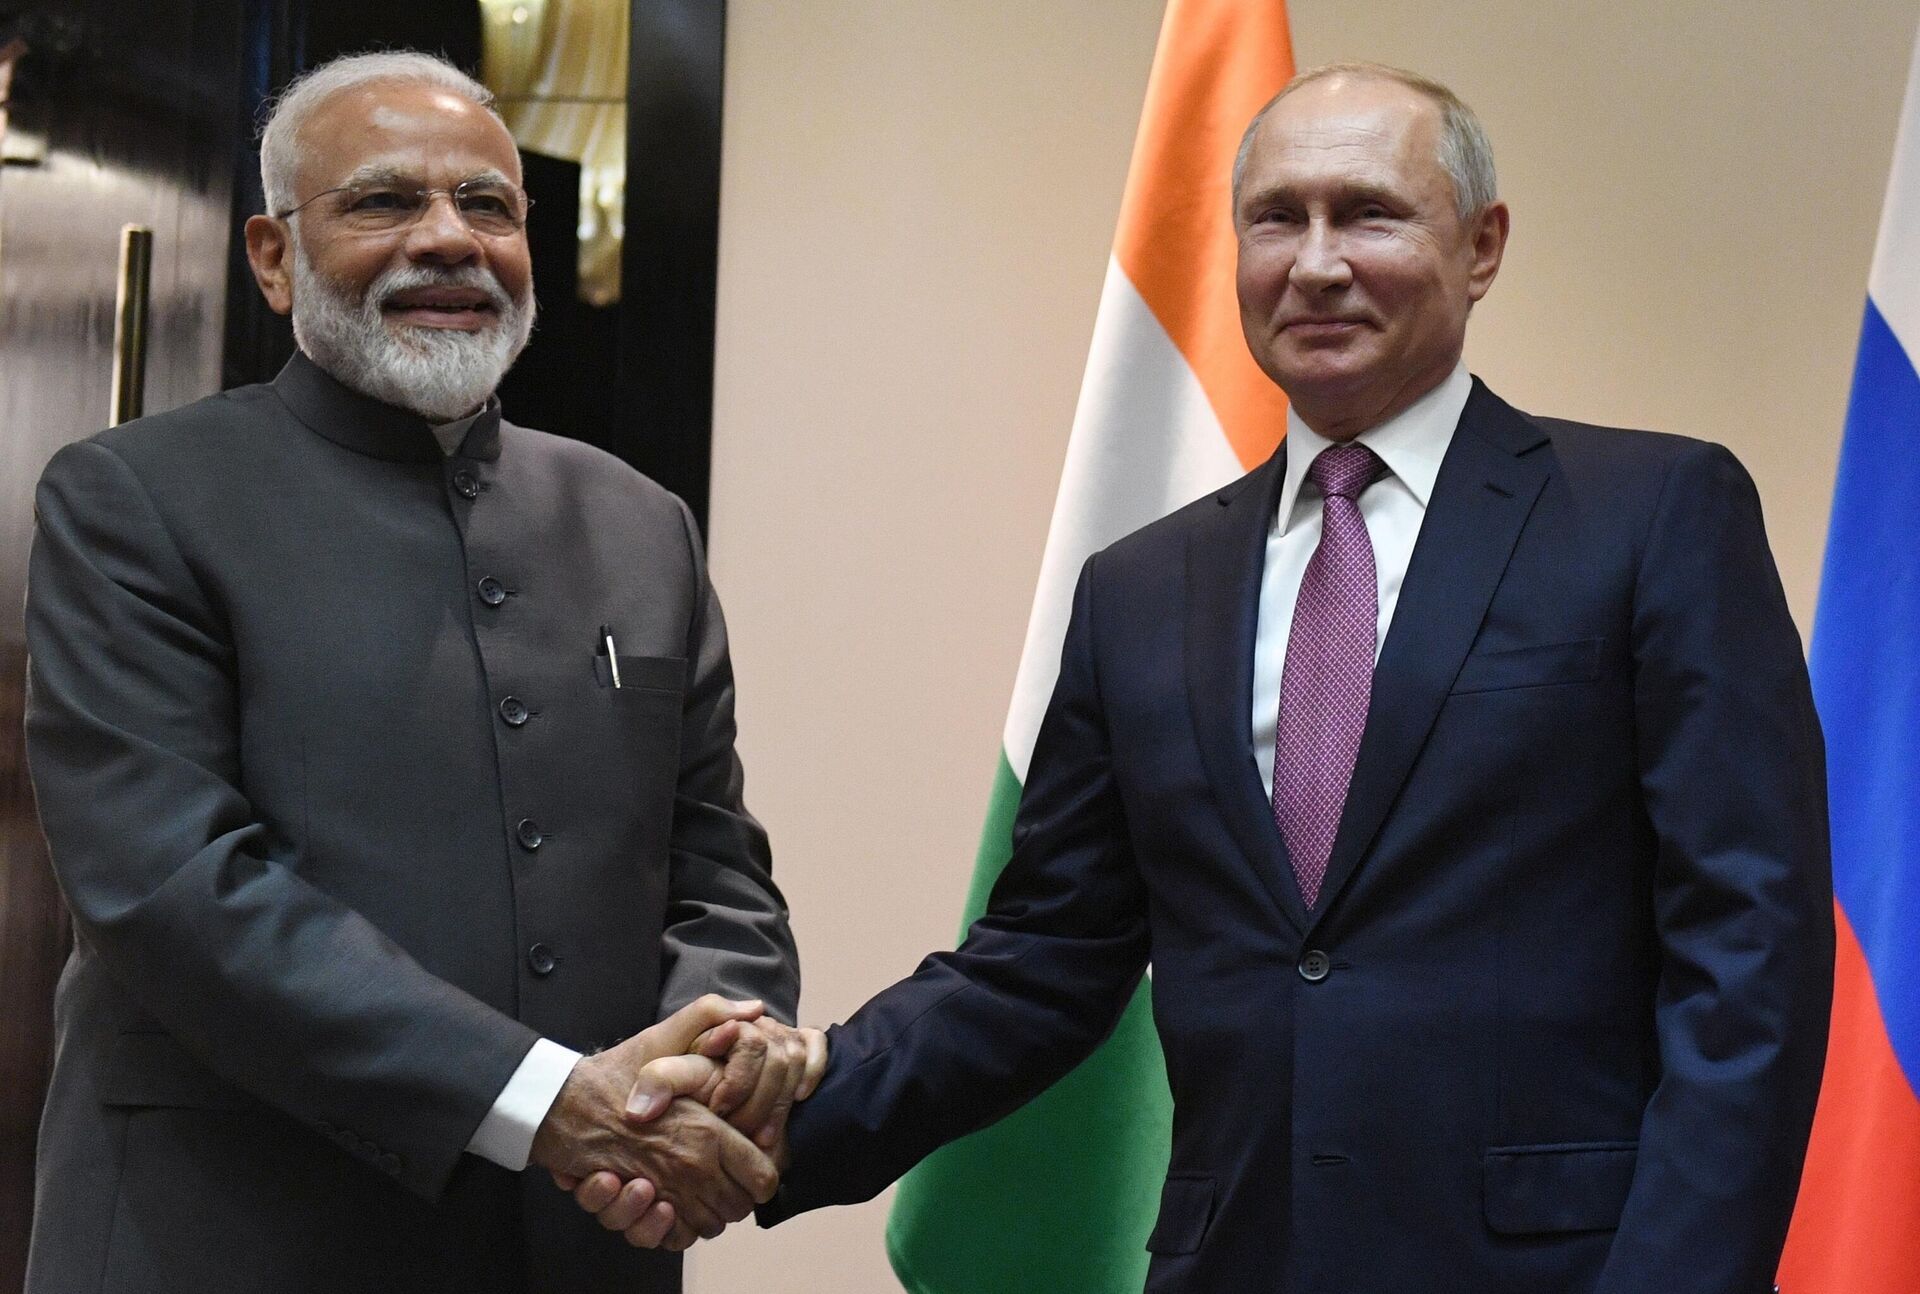 Russian President Vladimir Putin, right, and Indian Prime Minister Narendra Modi pose for a photo prior to their talks on a sideline of the Shanghai Cooperation Organization summit in Bishkek, Kyrgyzstan, June 13, 2019 - Sputnik India, 1920, 29.08.2023